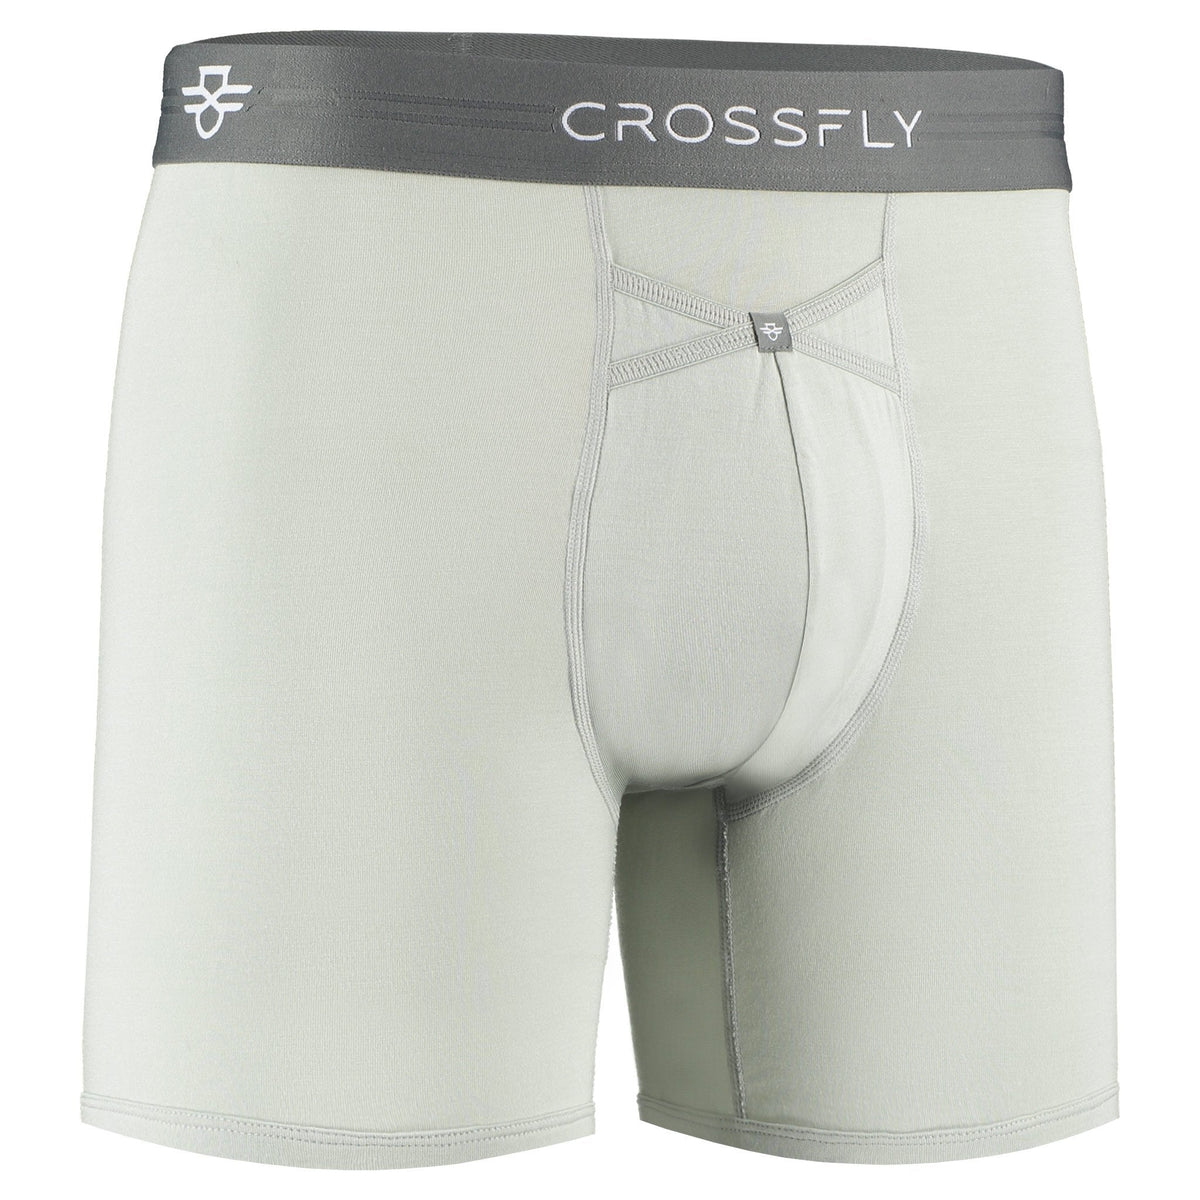 Crossfly men&#39;s IKON X 6&quot; silver / charcoal boxers from the Everyday series, featuring X-Fly and Coccoon internal pocket support.